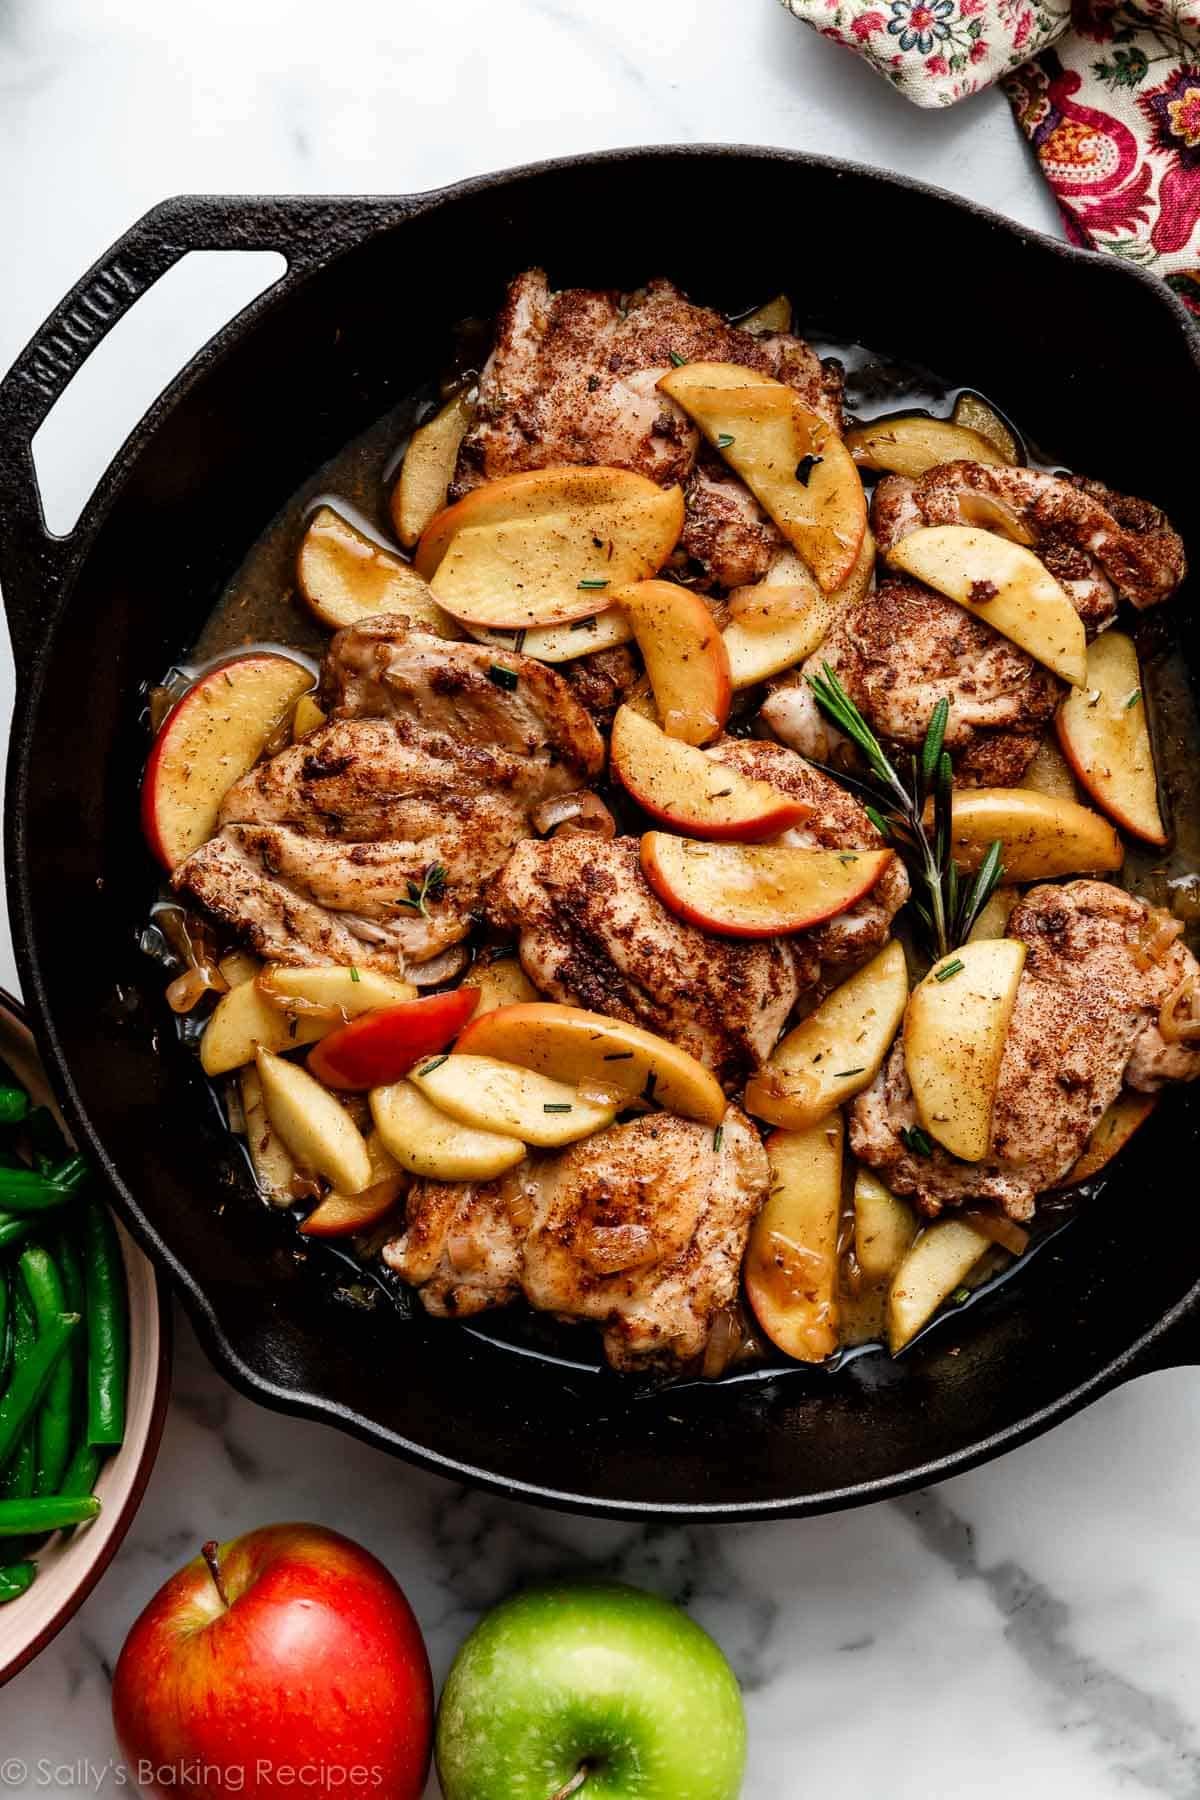 One skillet is all you need to make this flavorful apple cider chicken. Tender chicken thighs are coated with a cozy mix of warm spices, and topped with sweet apples and shallots sautéed in a juicy apple cider pan sauce. An easy dinner recipe you'll want to make on repeat all autumn long! Recipe on sallysbakingaddiction.com